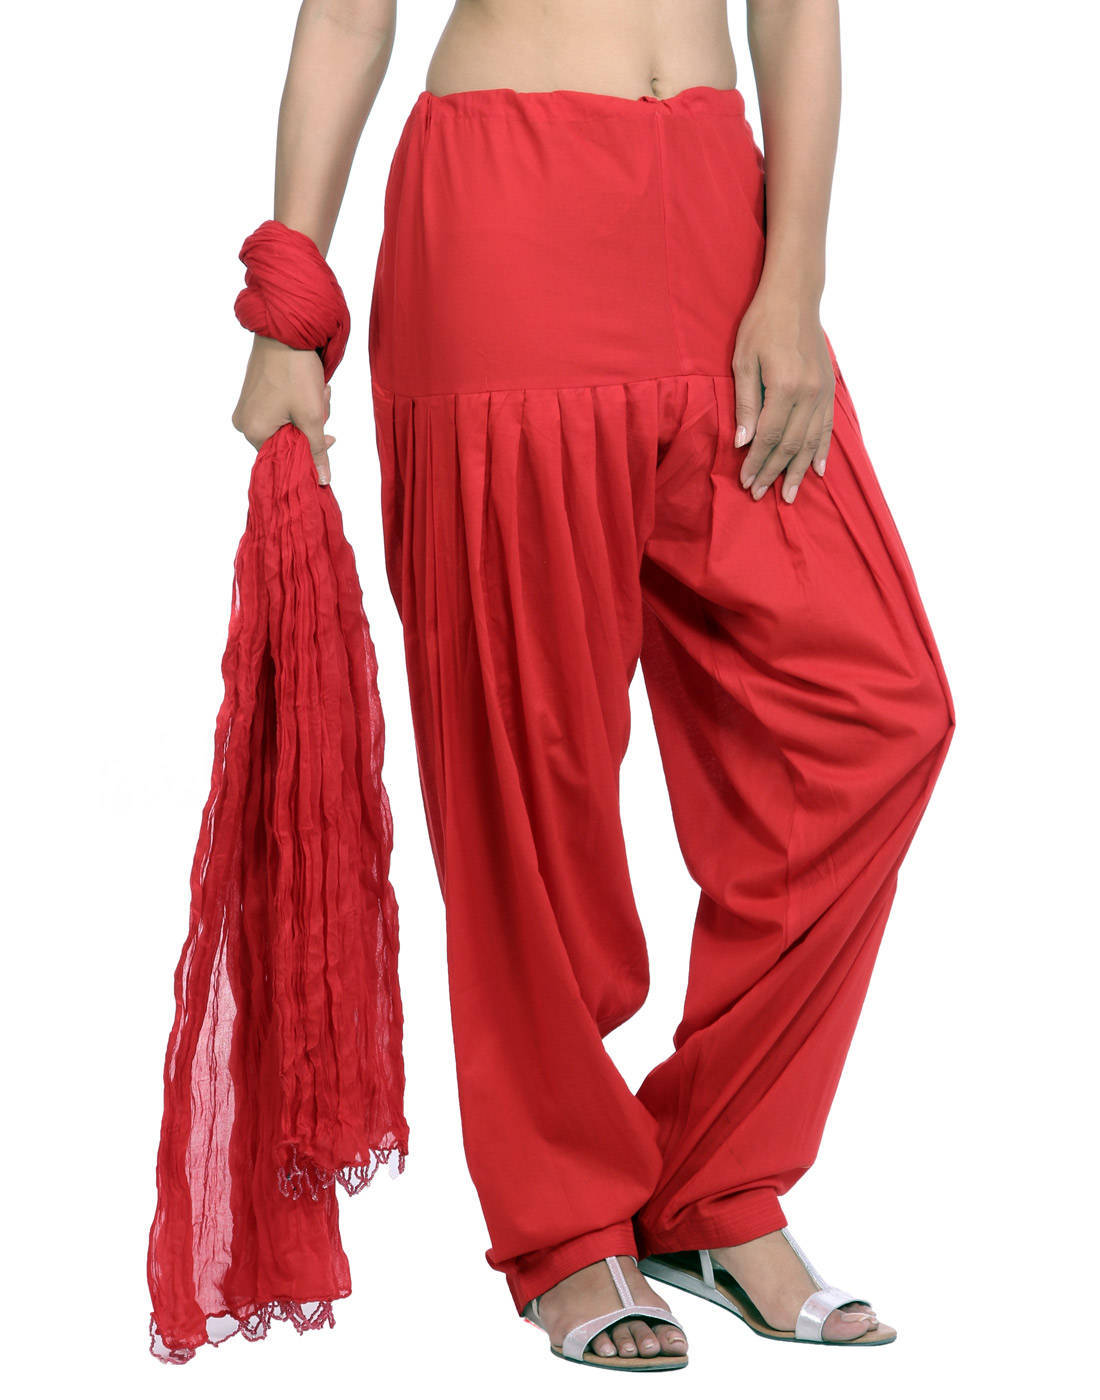 Stitched Maroon Ladies Cotton Patiala Salwar And Dupatta Set, Waist Size:  Free at Rs 520/piece in Jaipur